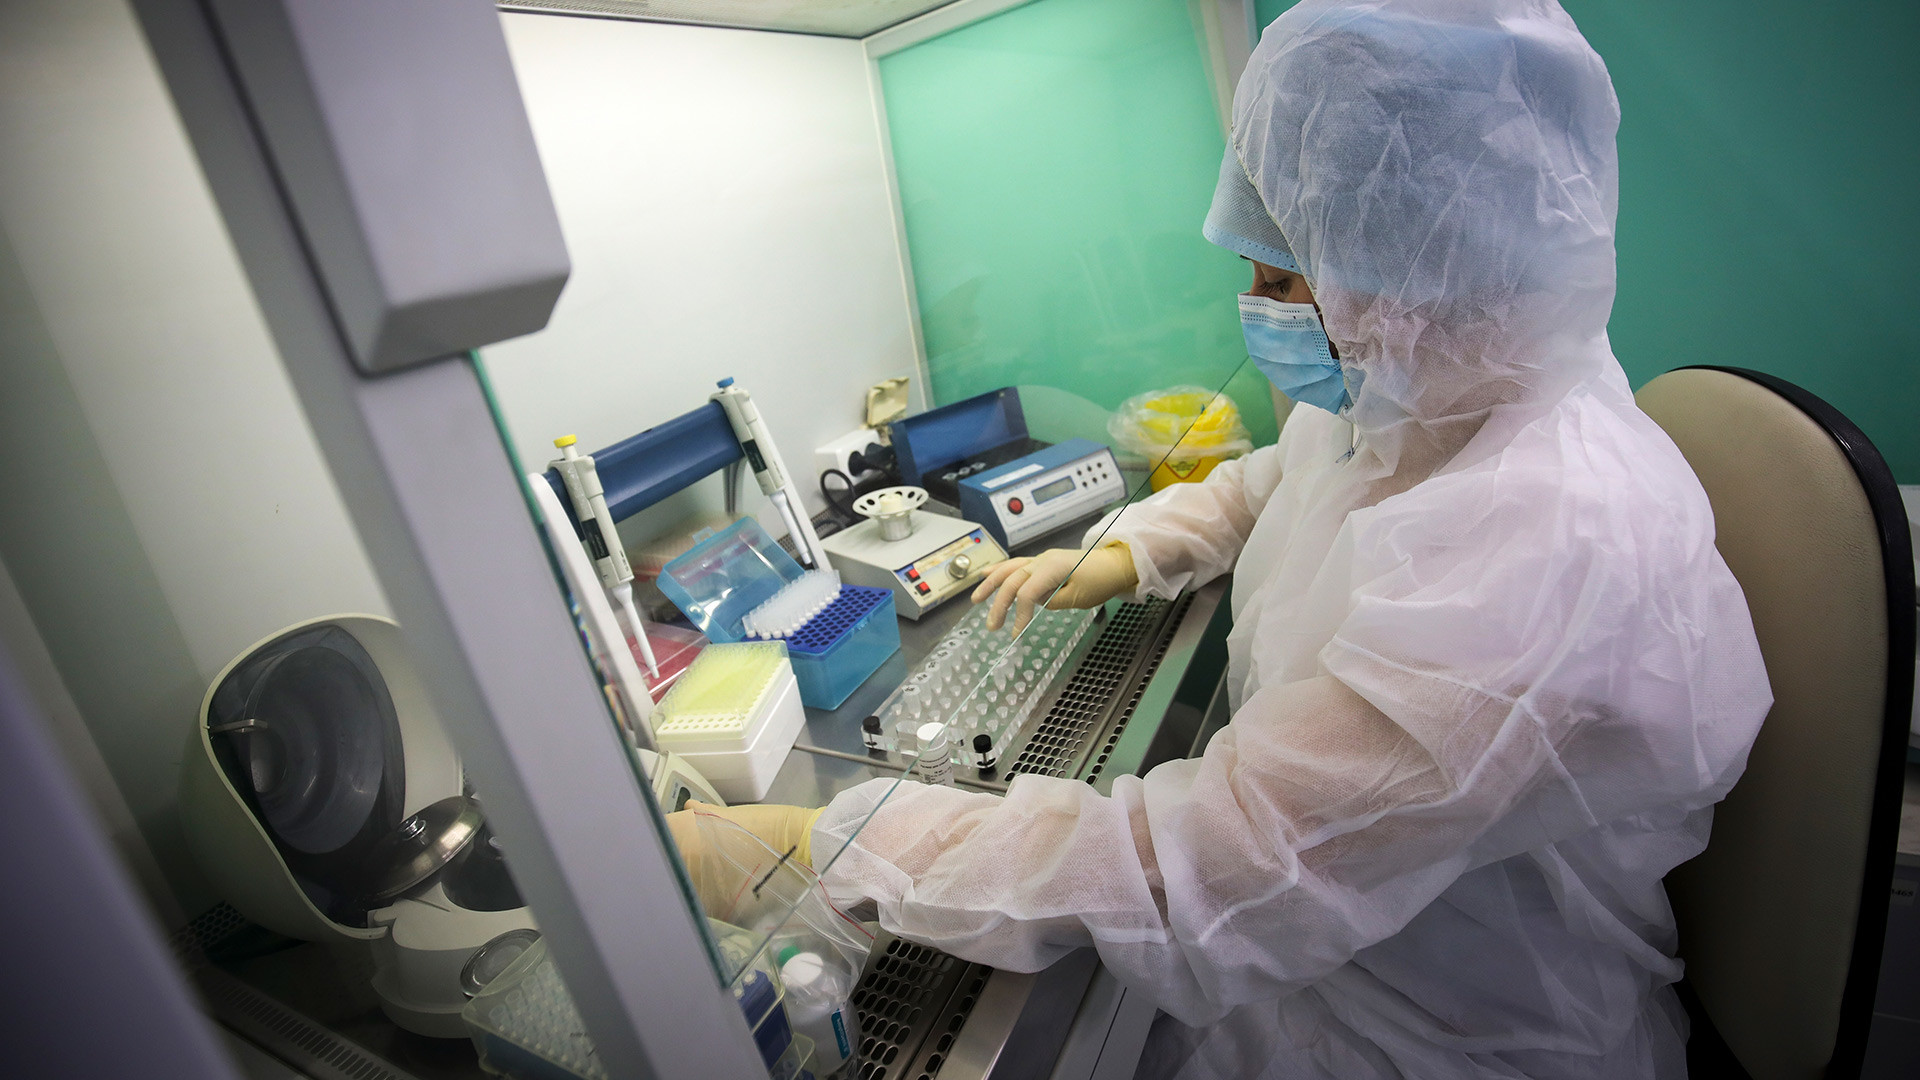 A medical staffer works with test systems for the diagnosis of coronavirus, at the Krasnodar Center for Hygiene and Epidemiology microbiology lab in Krasnodar, Russia